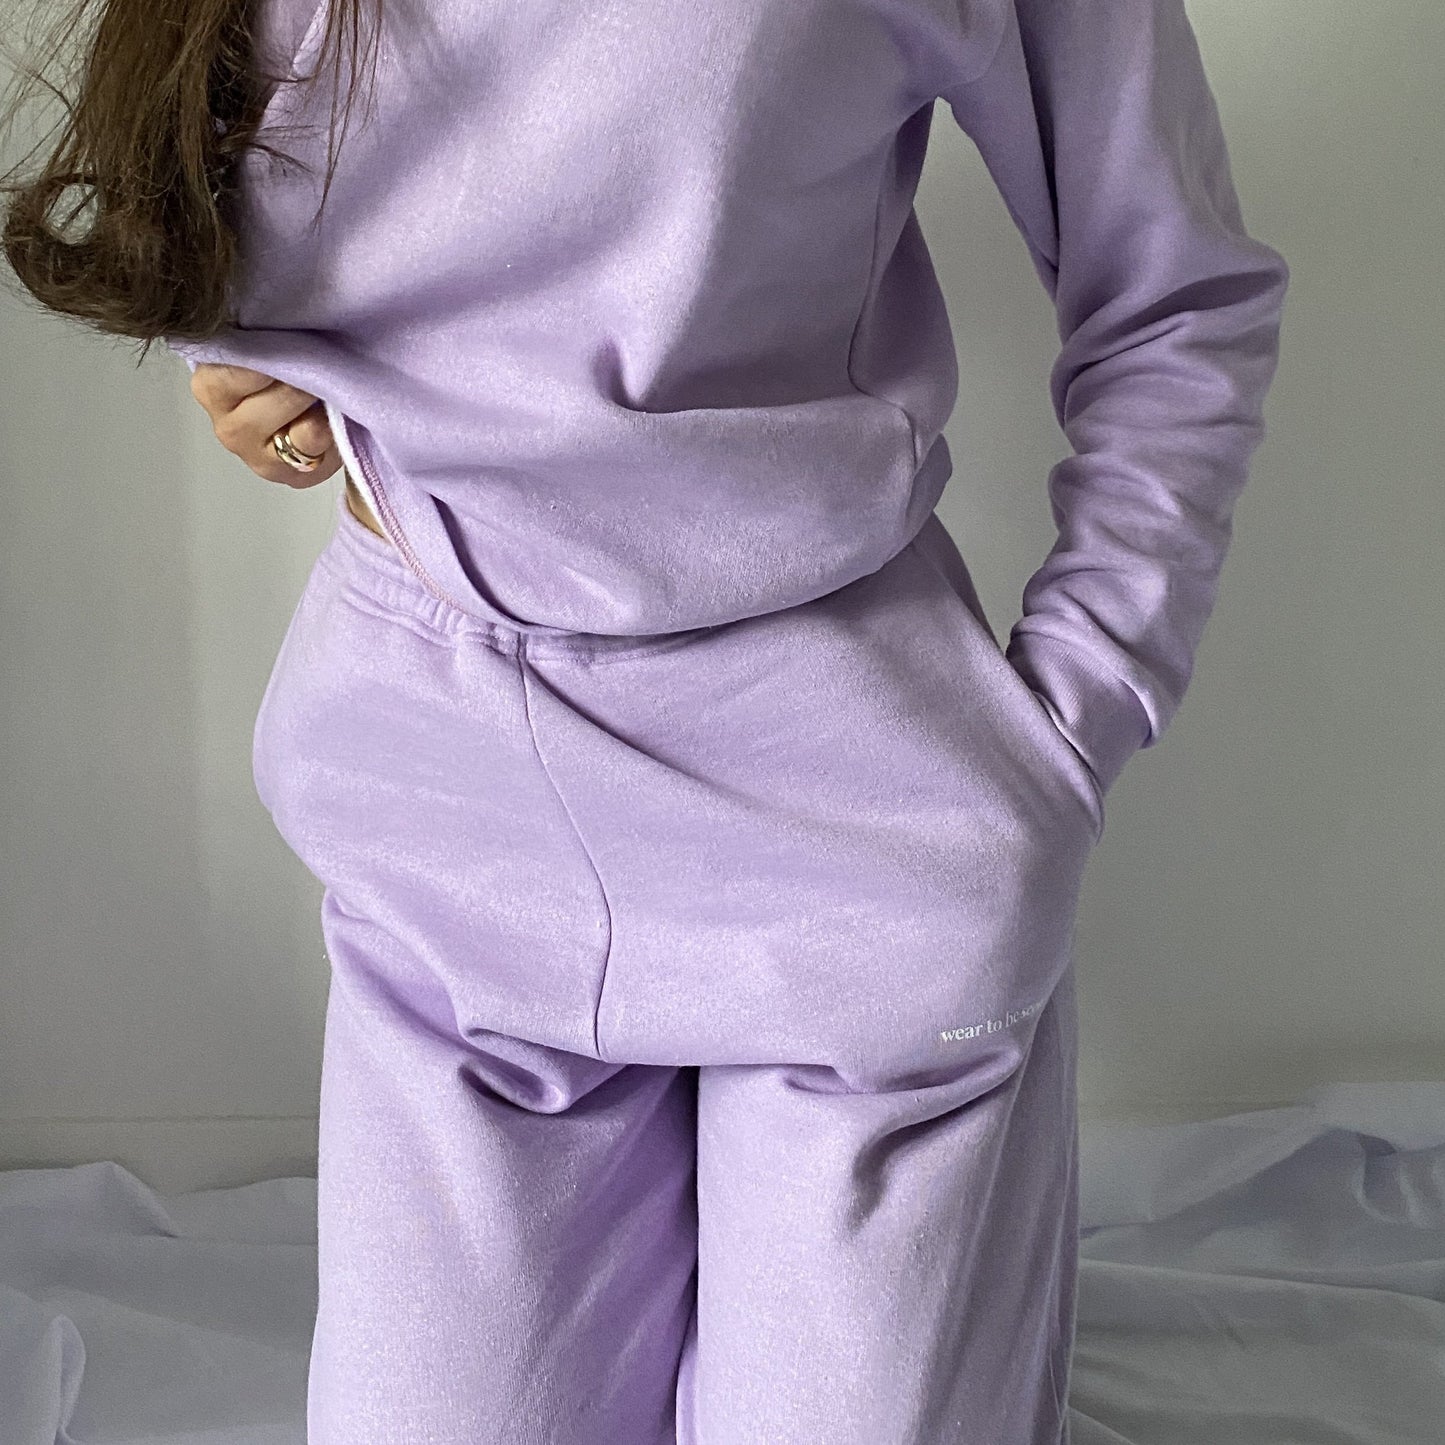 Lilac Oversized Joggers